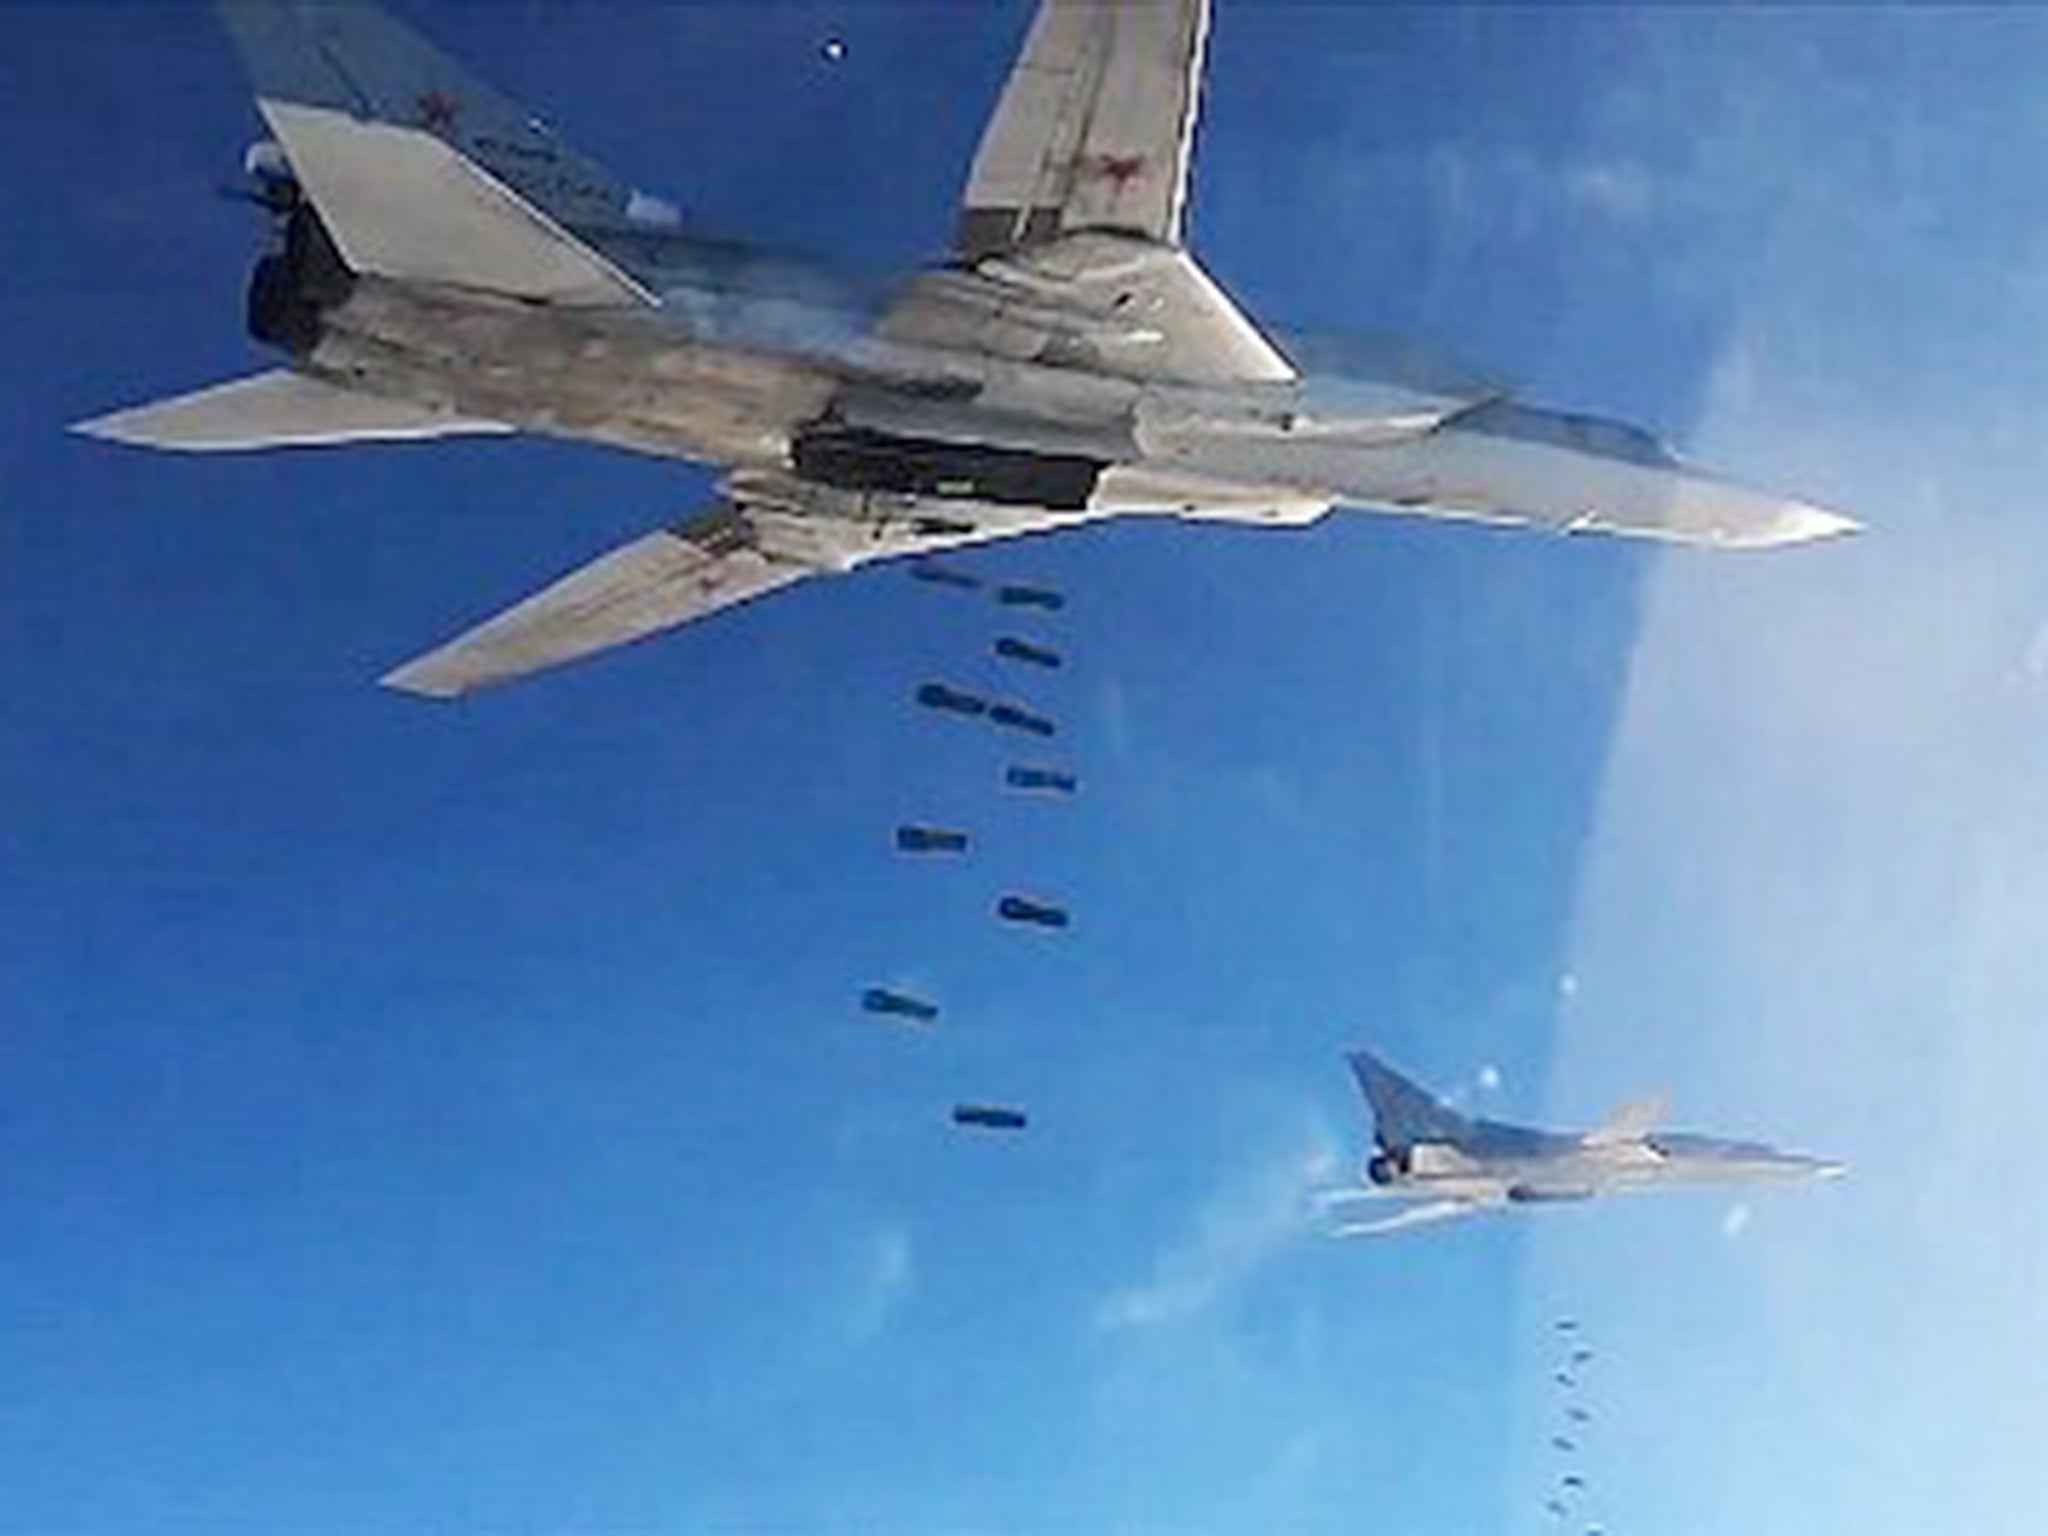 Russian Air Force's Tupolev Tu-22 long-range strategic bombers carry out airstrikes against Isis targets in Syria